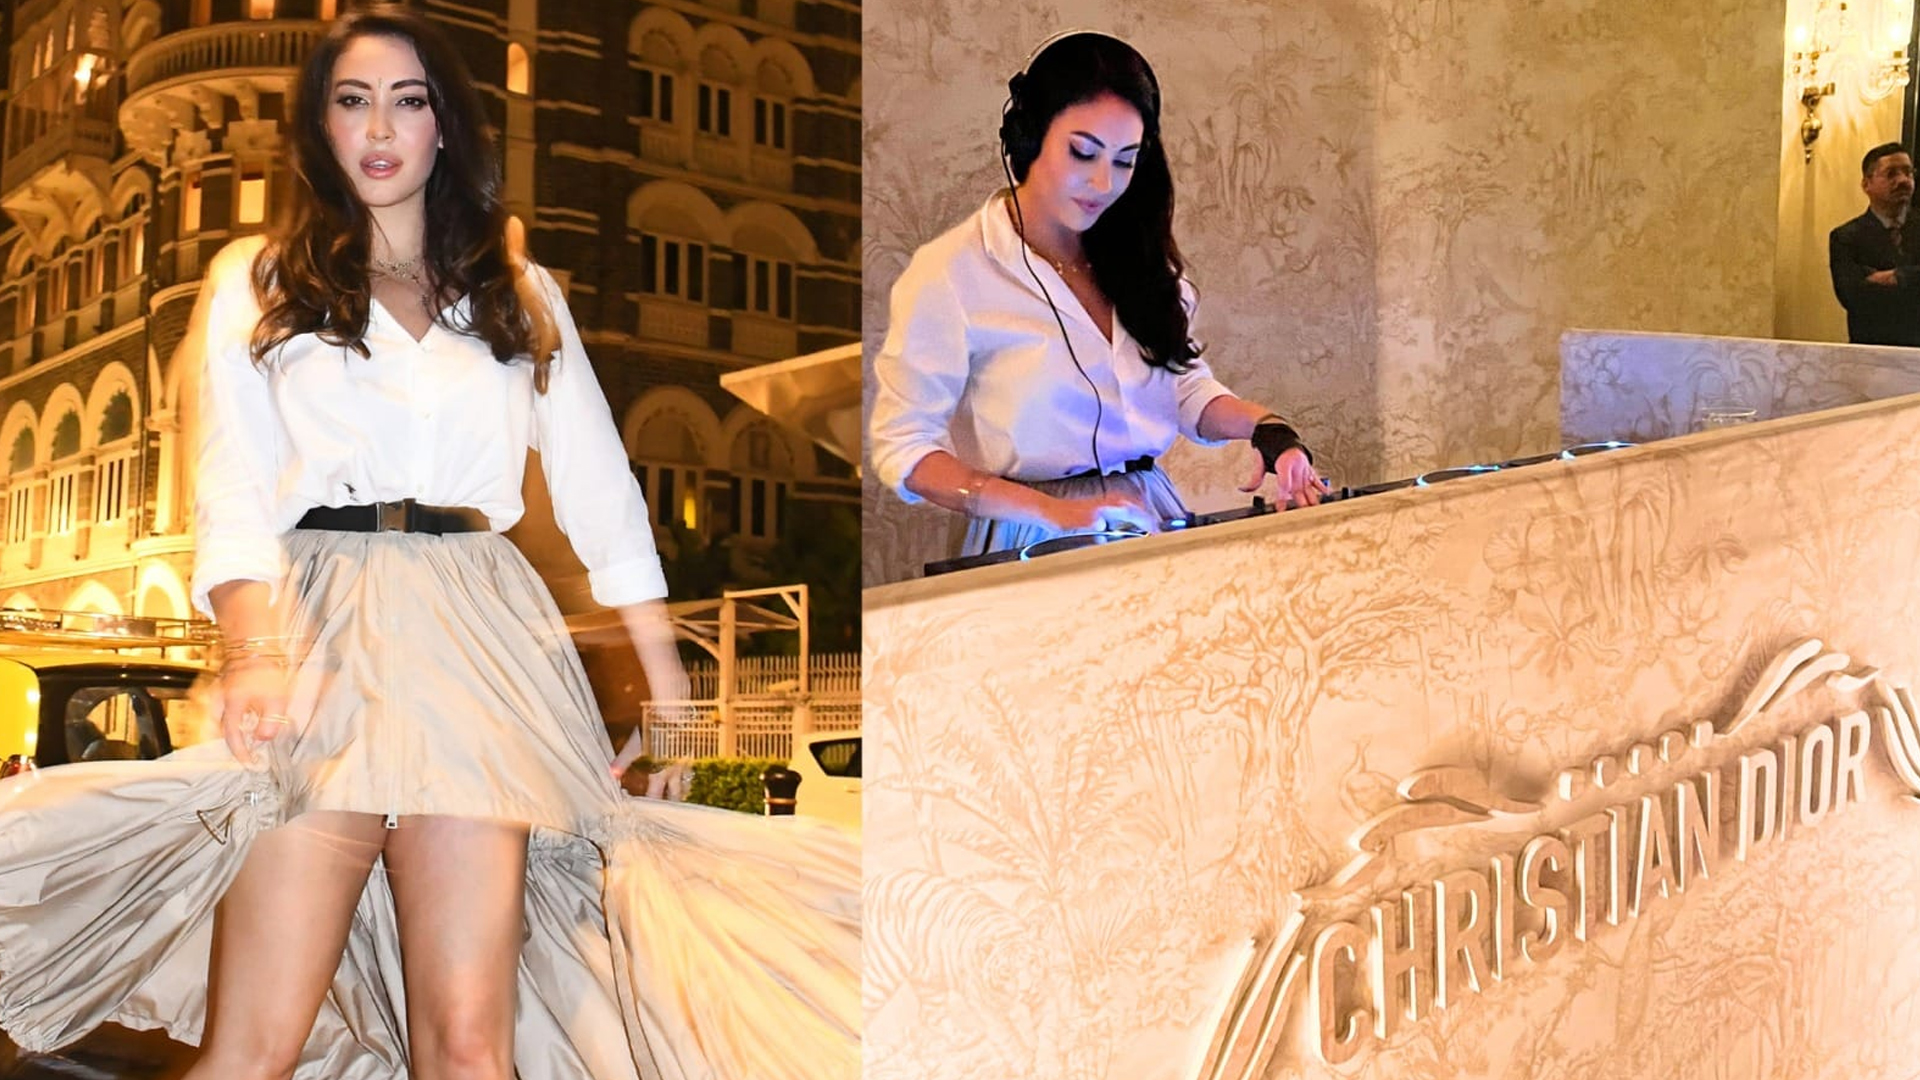 DJ Nina Shah plays for the Dior Fall 2023 show at Gateway Of India, says, “I believe India is the future of music and fashion and this event displayed our traditional culture, through art, so beautifully to the world”